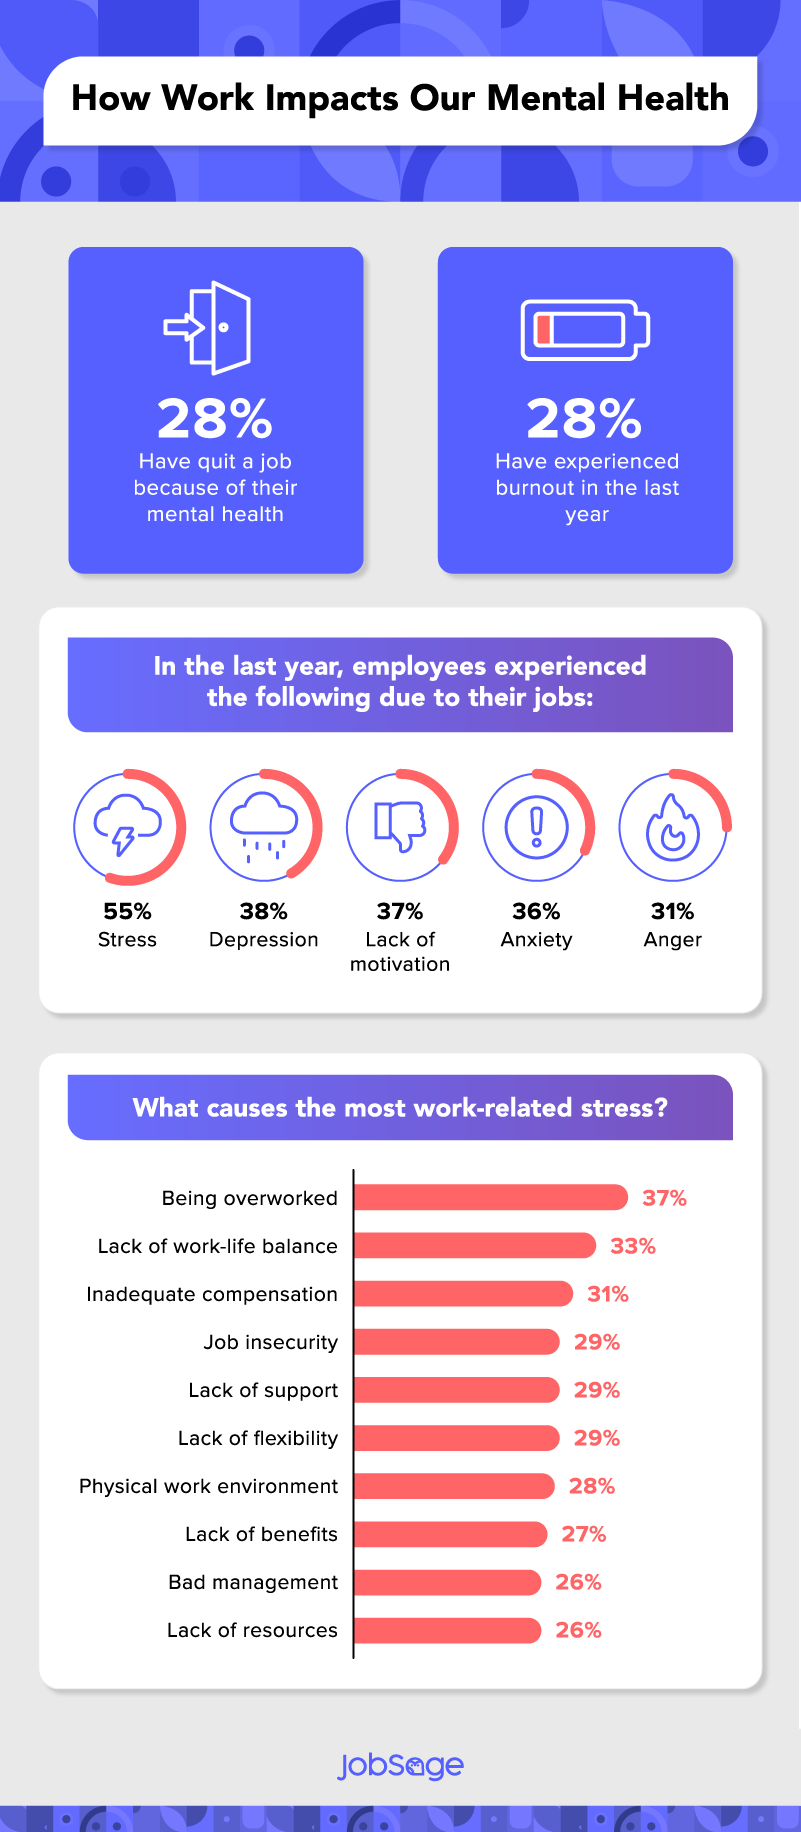 effects of work on employees' mental health